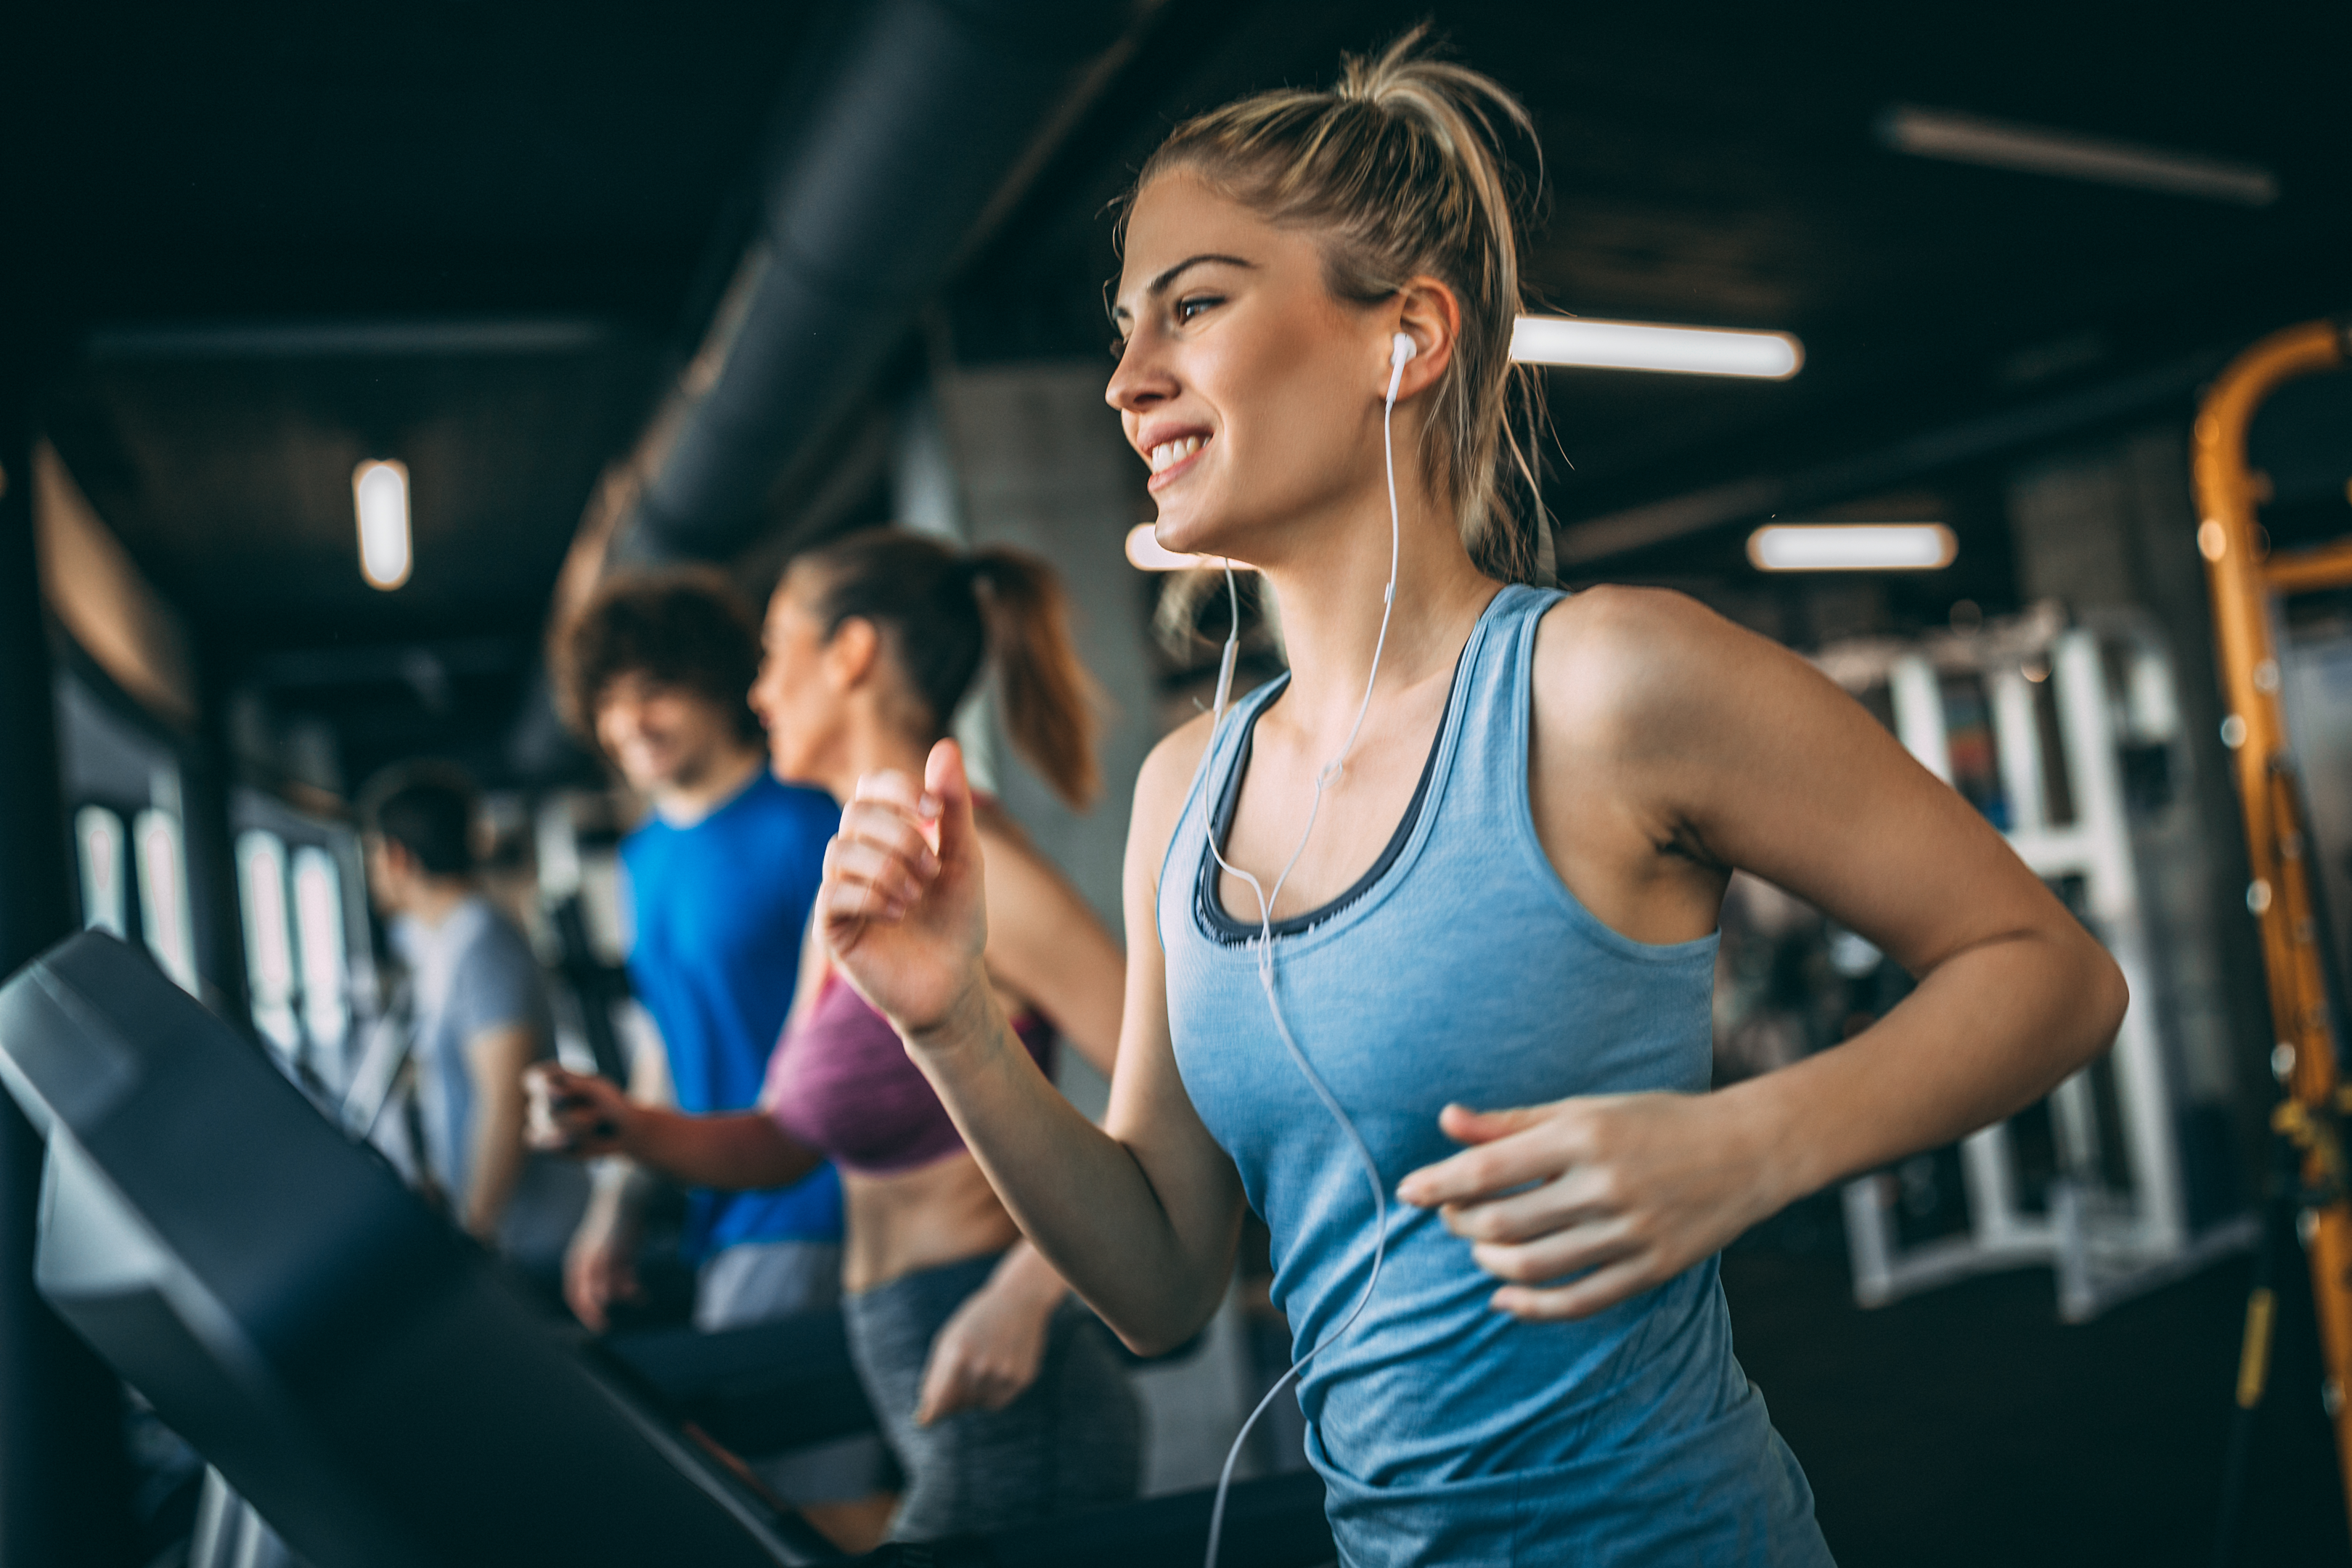 Young People Running on a Treadmill (Shutterstock)